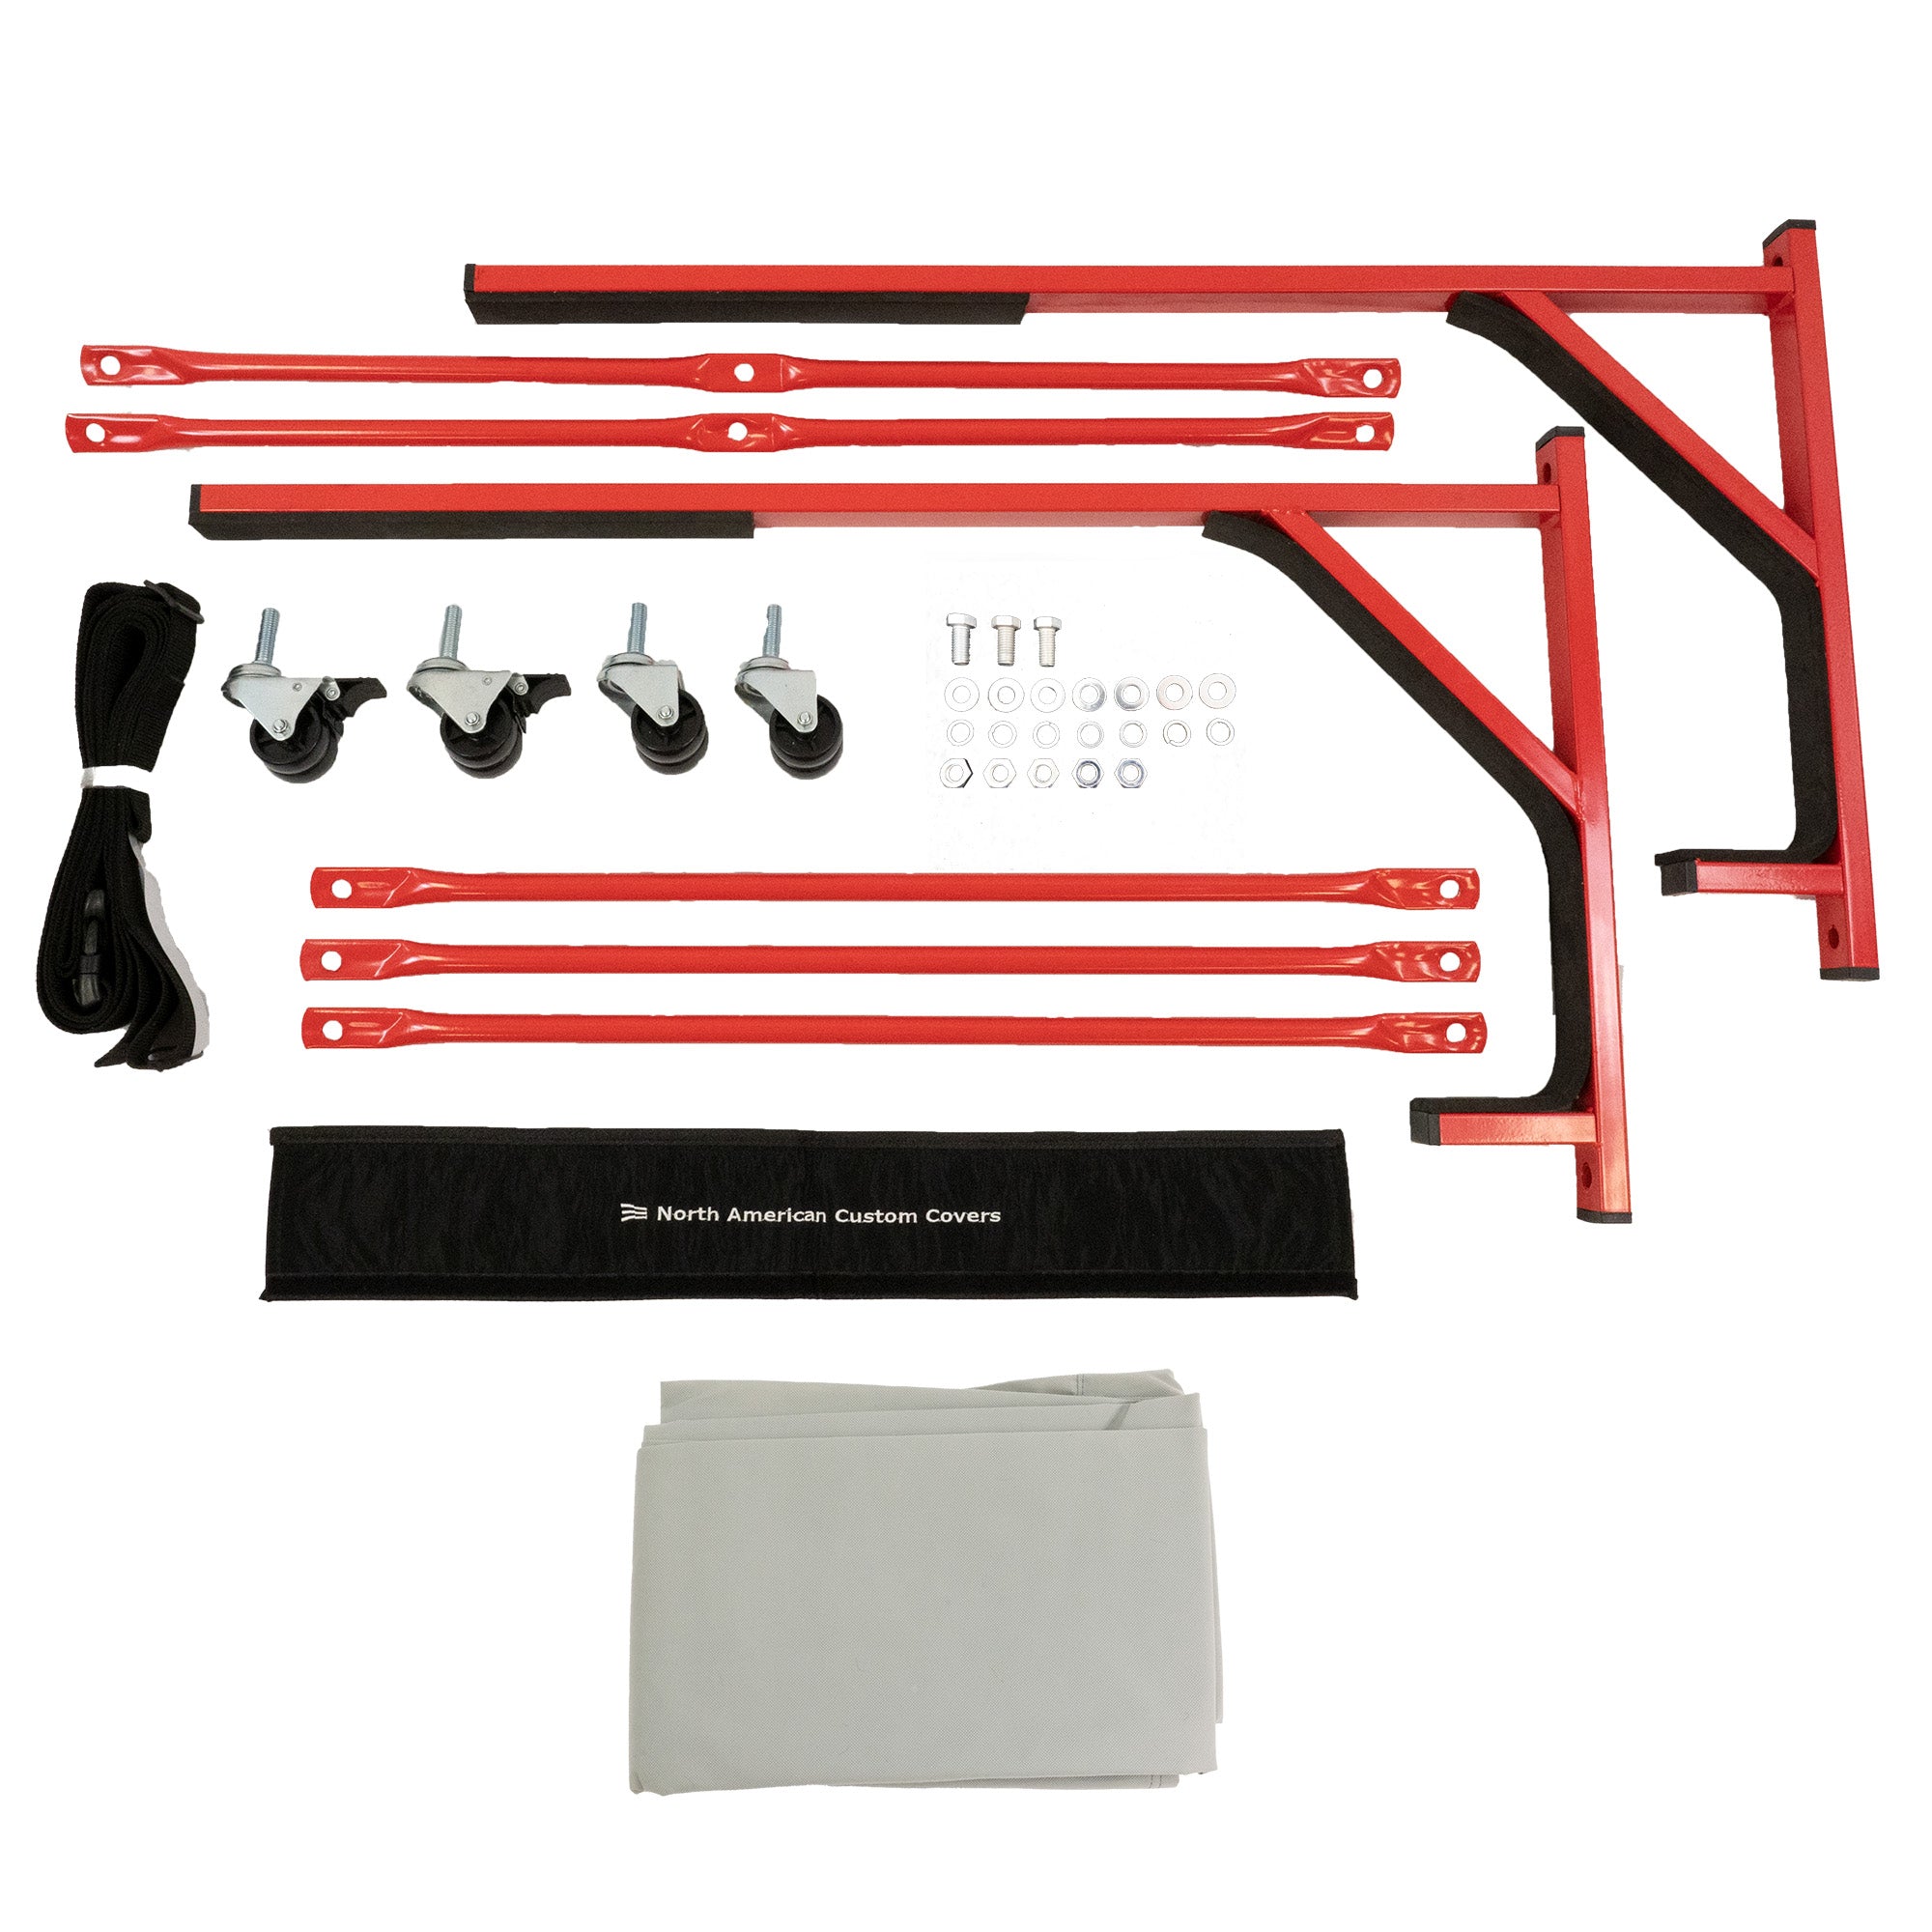 Triumph TR2 TR3 TR4 TR250 TR7 Heavy-duty Hardtop Stand Trolley Cart Rack (Red) with Securing Harness and Hard Top Dust Cover (050R)